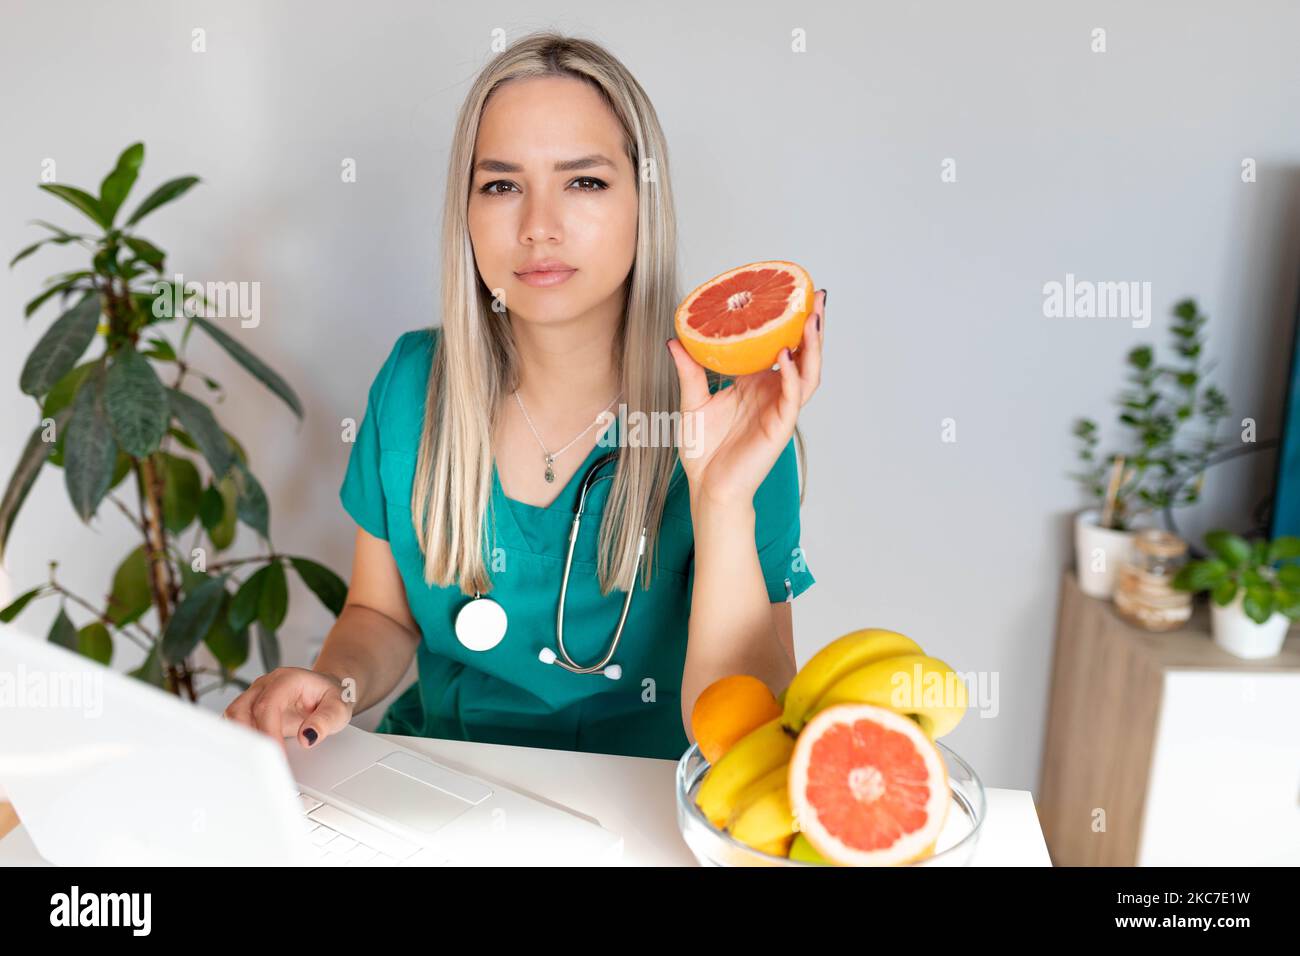 Female nutritionist with fruits working at her desk. Smiling nutritionist in her office, she is showing healthy vegetables and fruits, healthcare Stock Photo